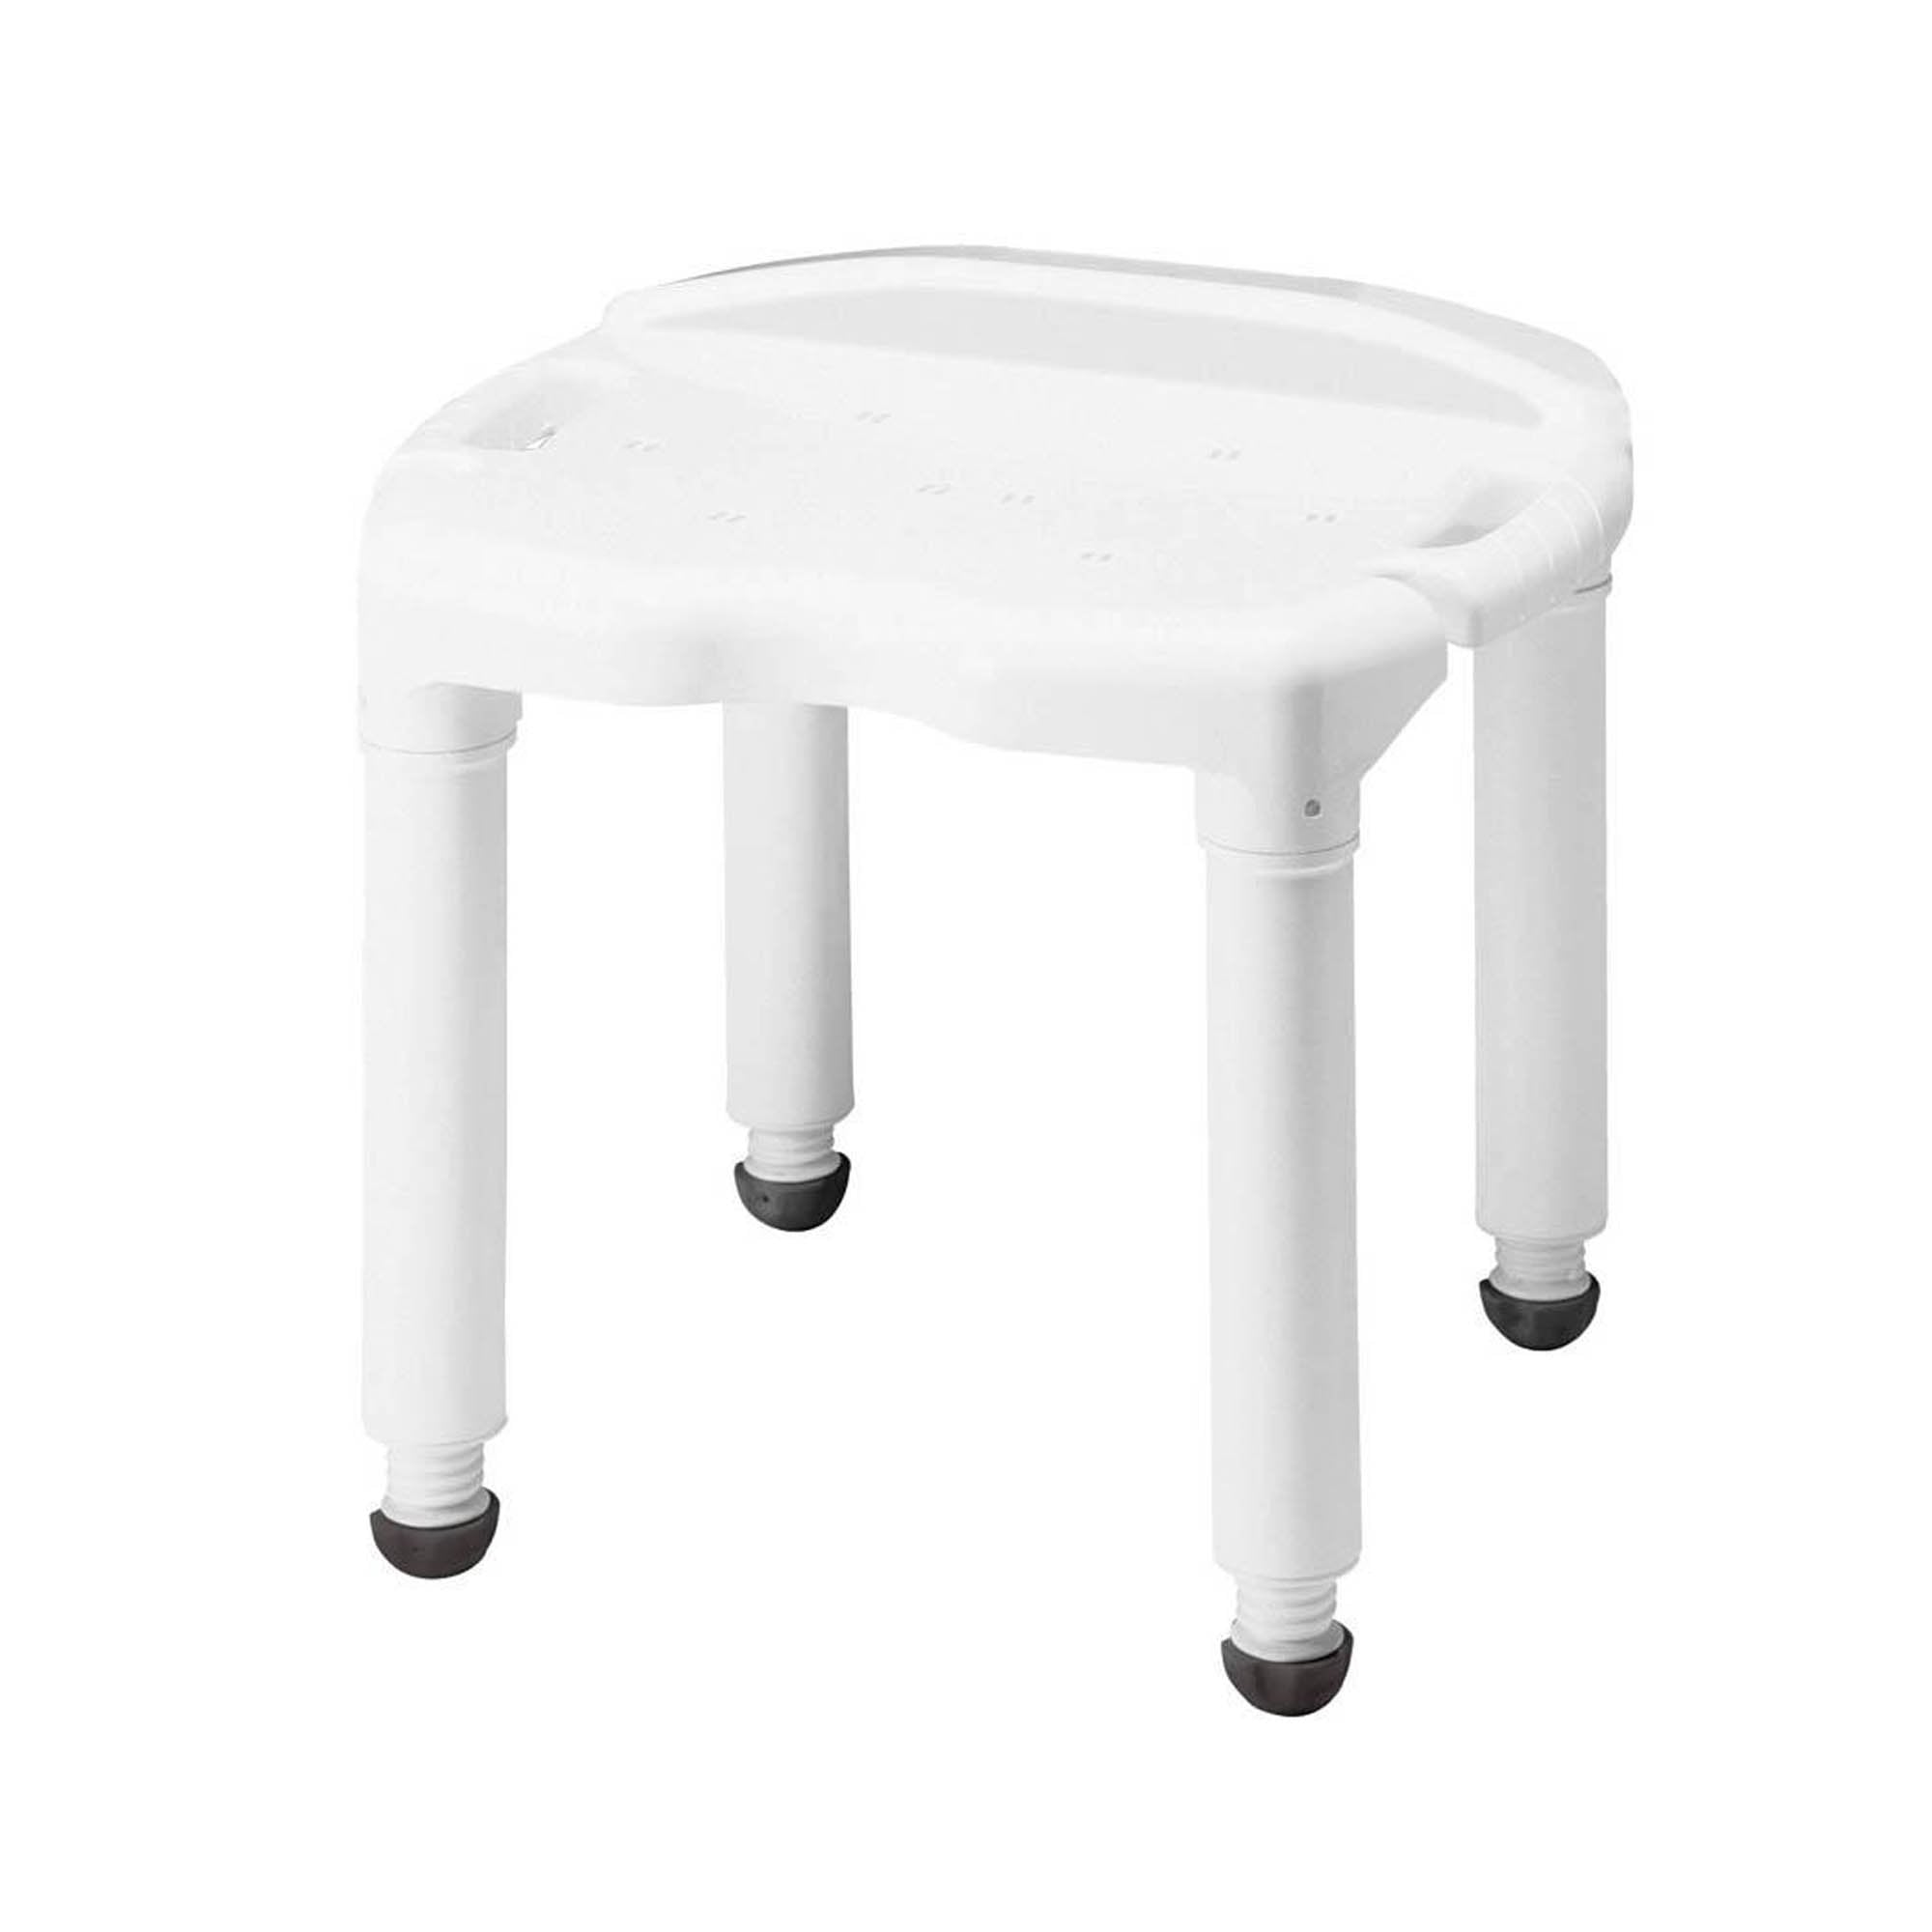 Bath Bench Carex® Without Arms Plastic Frame Without Backrest 21 Inch Seat Width 400 lbs. Weight Capacity